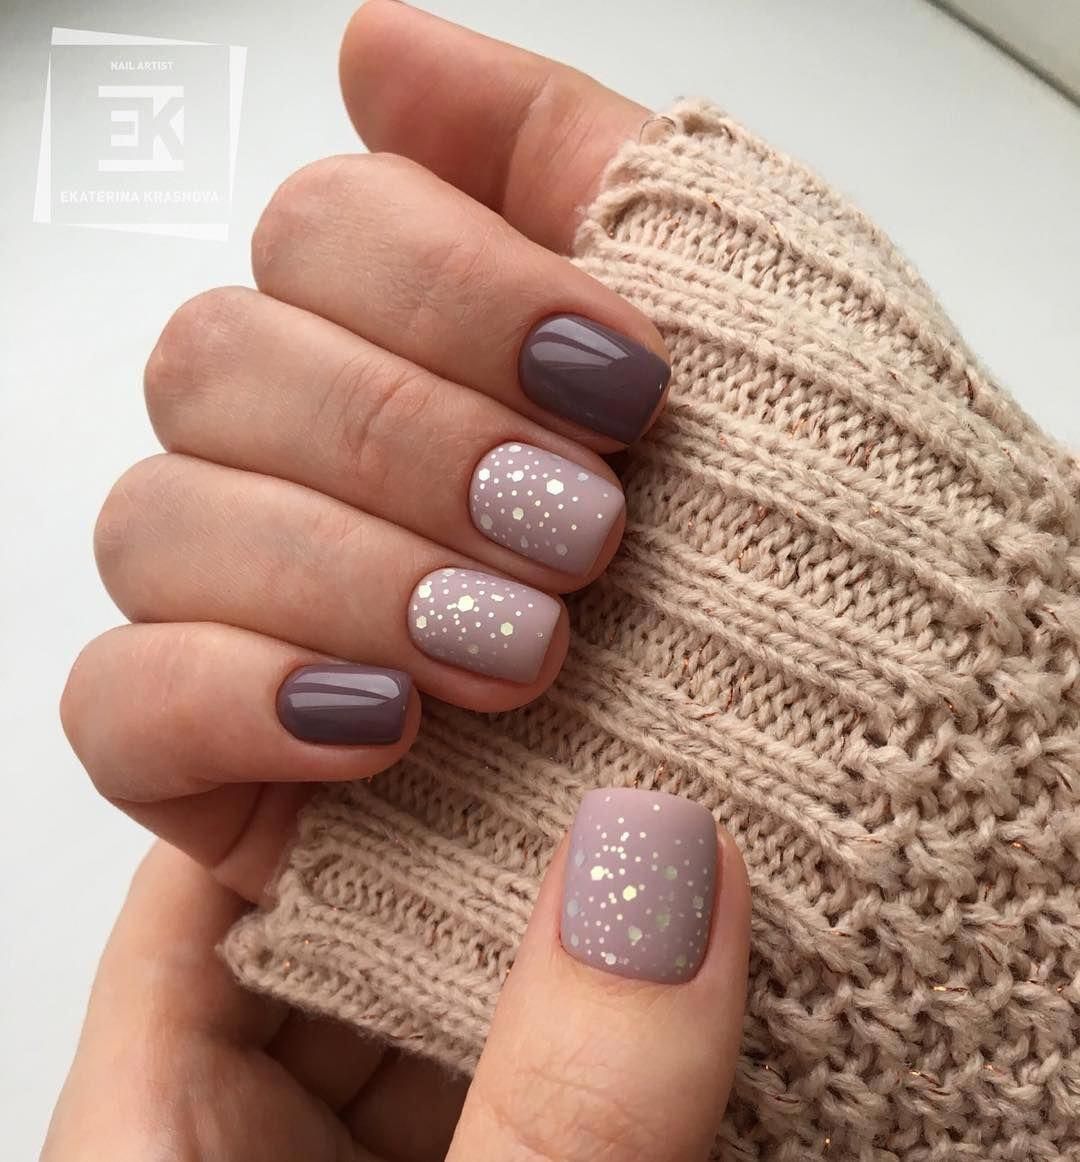 Are You Looking For Nail Colors Design For Winter See Our Collection Full Of Cute Winter Nail Colors Design Ideas And Nails Short Square Nails Fabulous Nails